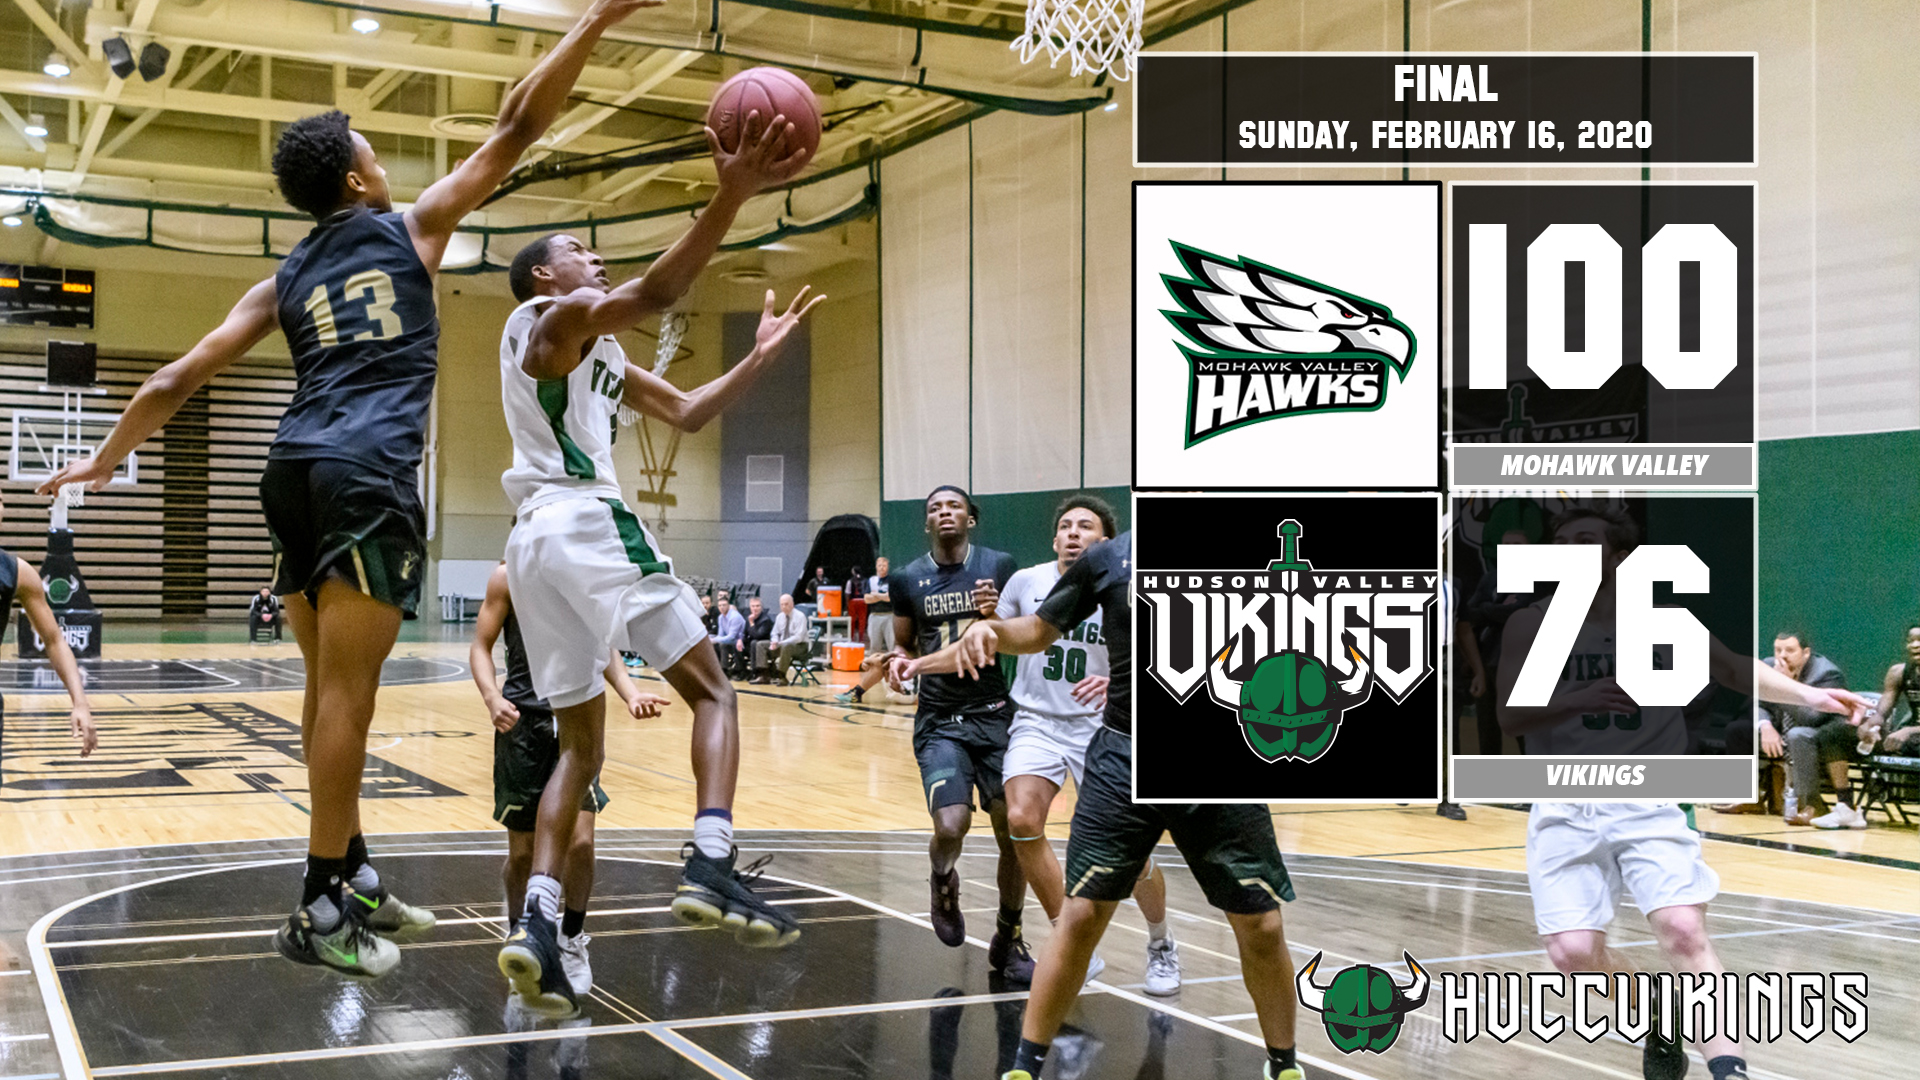 Men's basketball defeated by Mohawk Valley 100-76 on Feb. 16, 2020. 